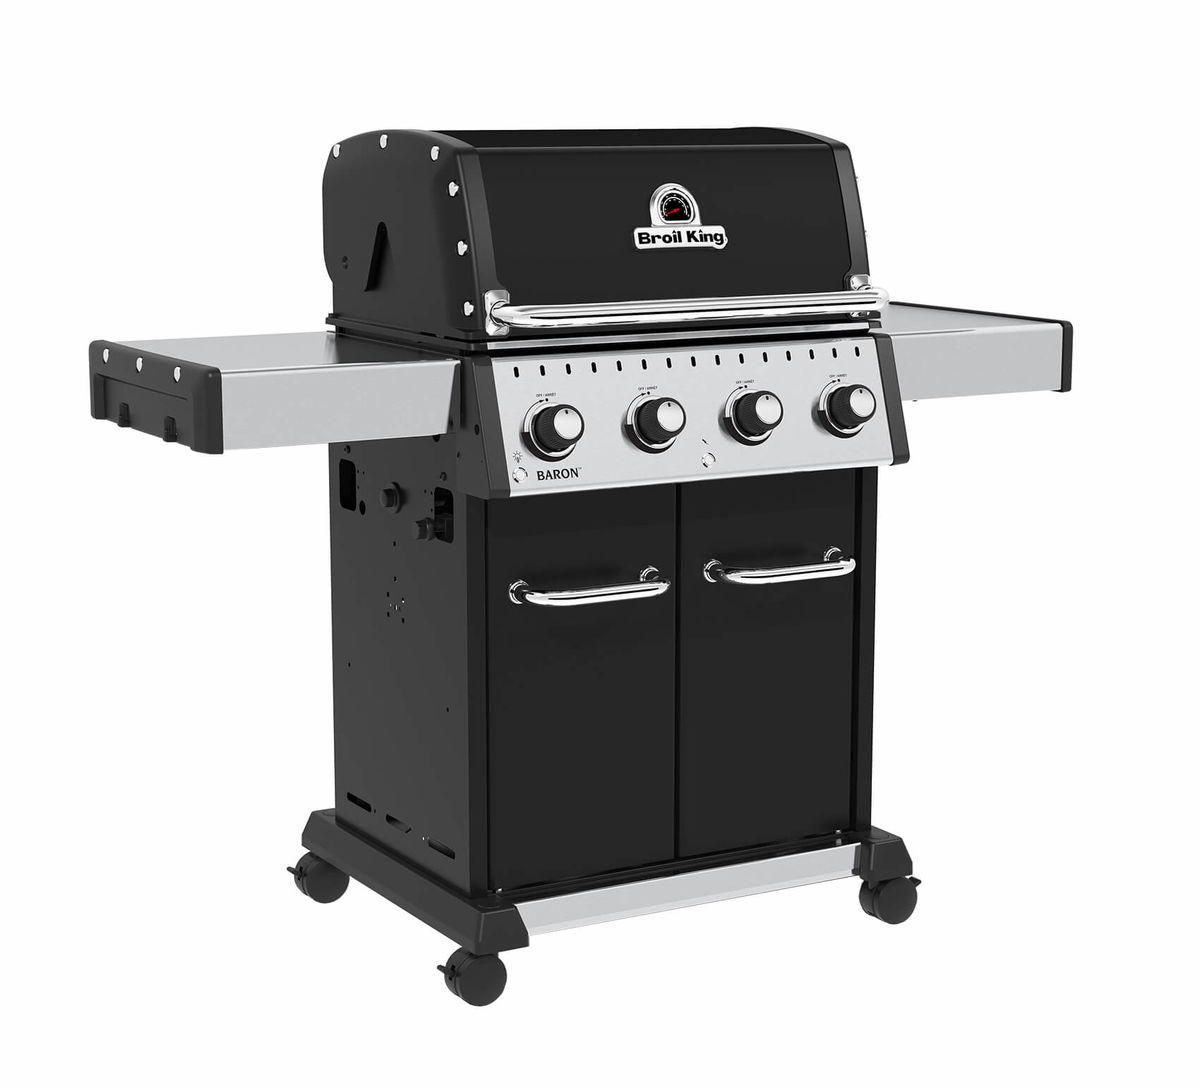 Image of Broil King Baron 420 Gasgrill bei nettoshop.ch